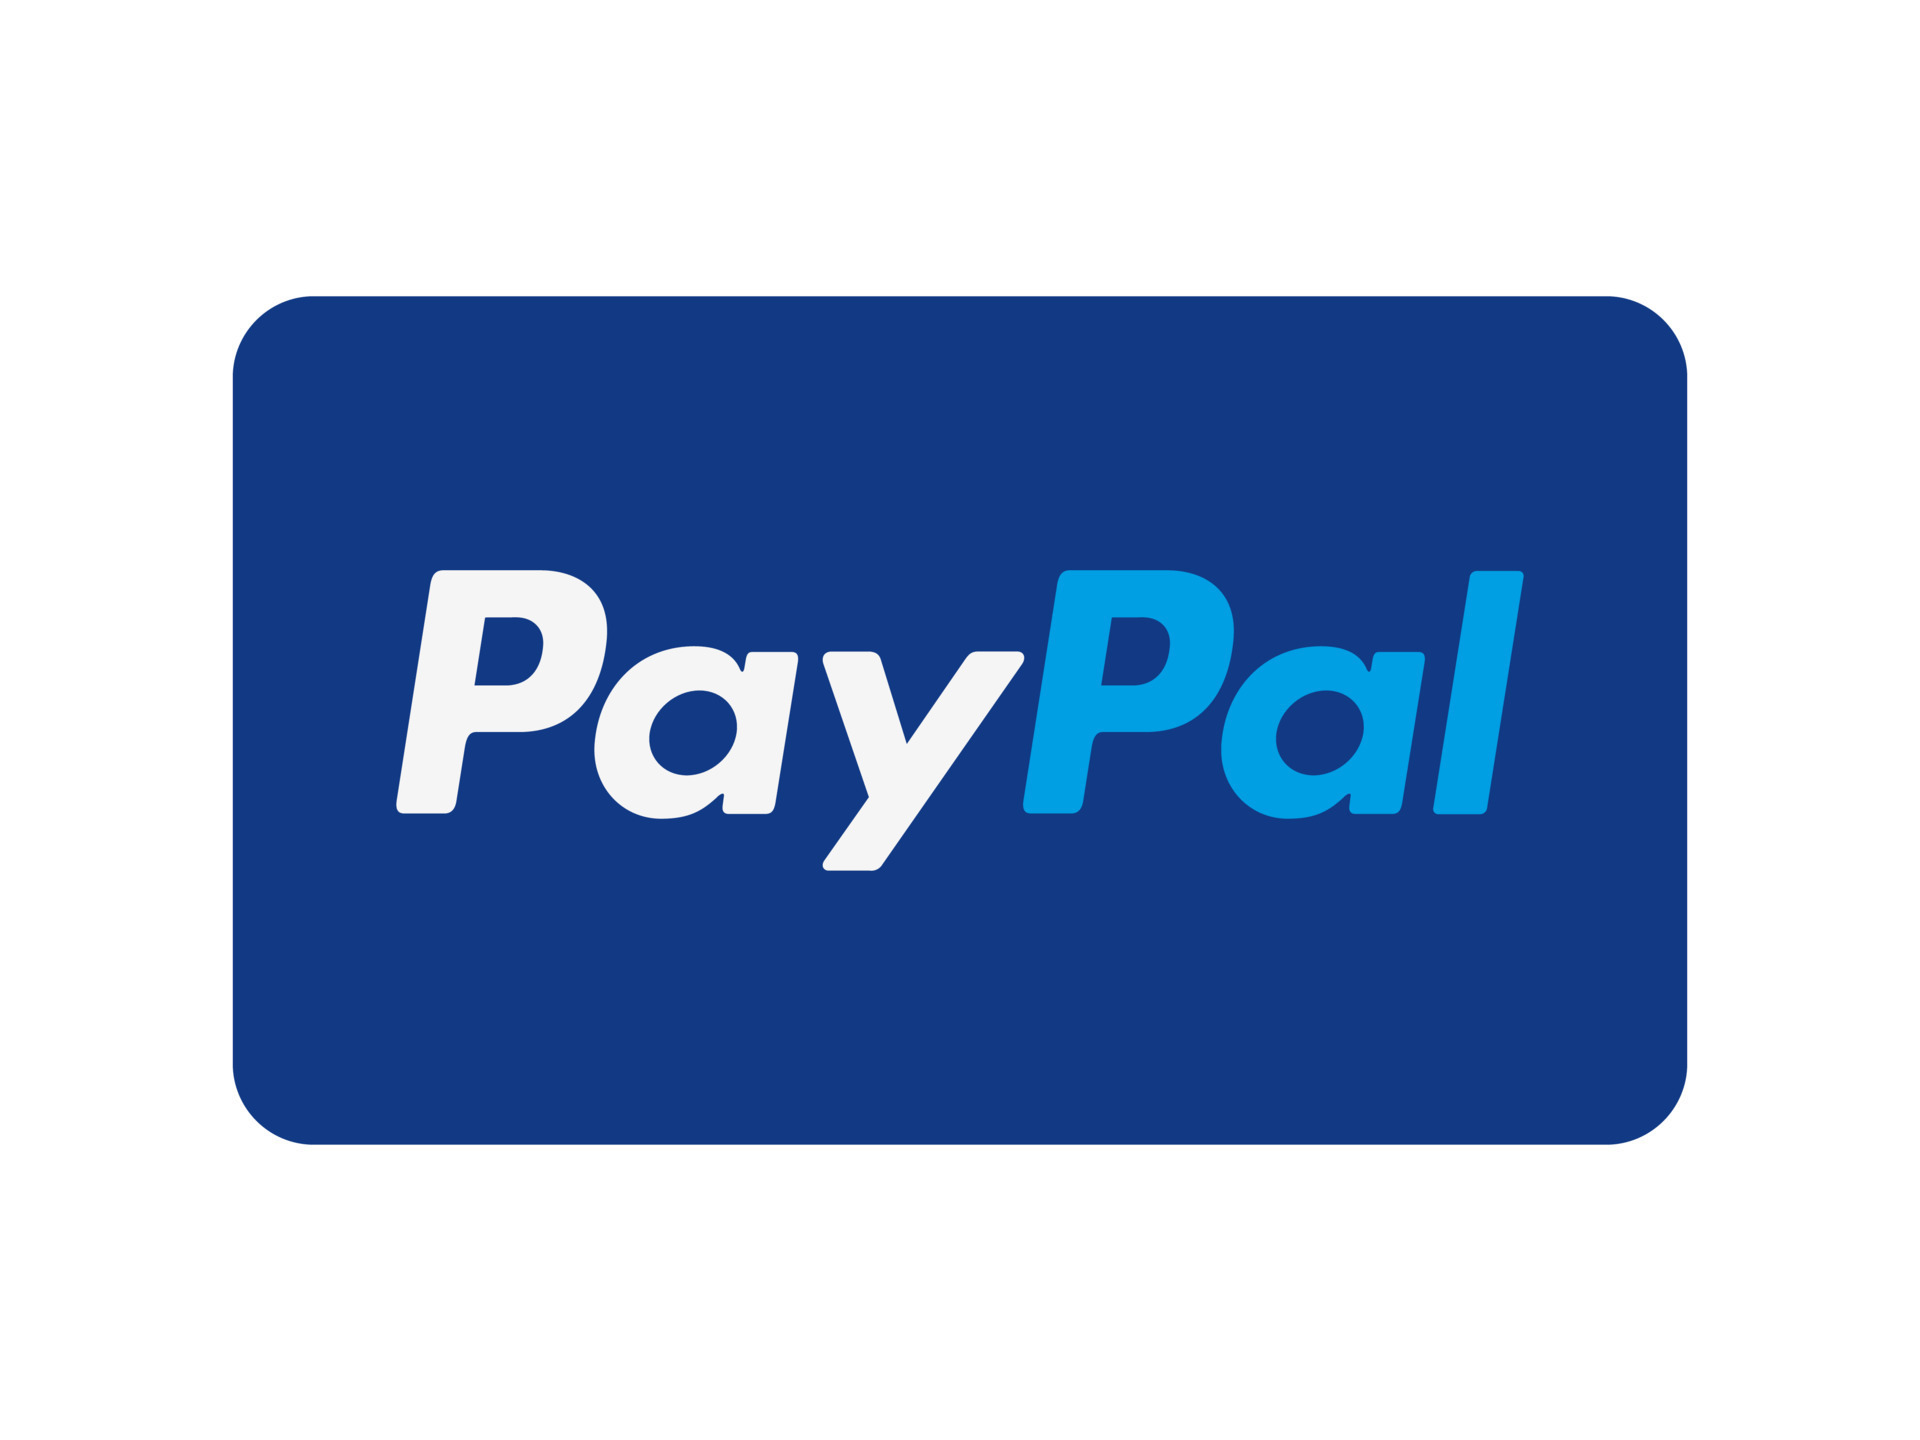 PayPal账号被<span style='color:red;'>关联</span>！跨境卖家如何自救？<span style='color:red;'>关于</span>PayPal防<span style='color:red;'>关联</span>你不得不<span style='color:red;'>知道</span><span style='color:red;'>的</span><span style='color:red;'>事</span>！